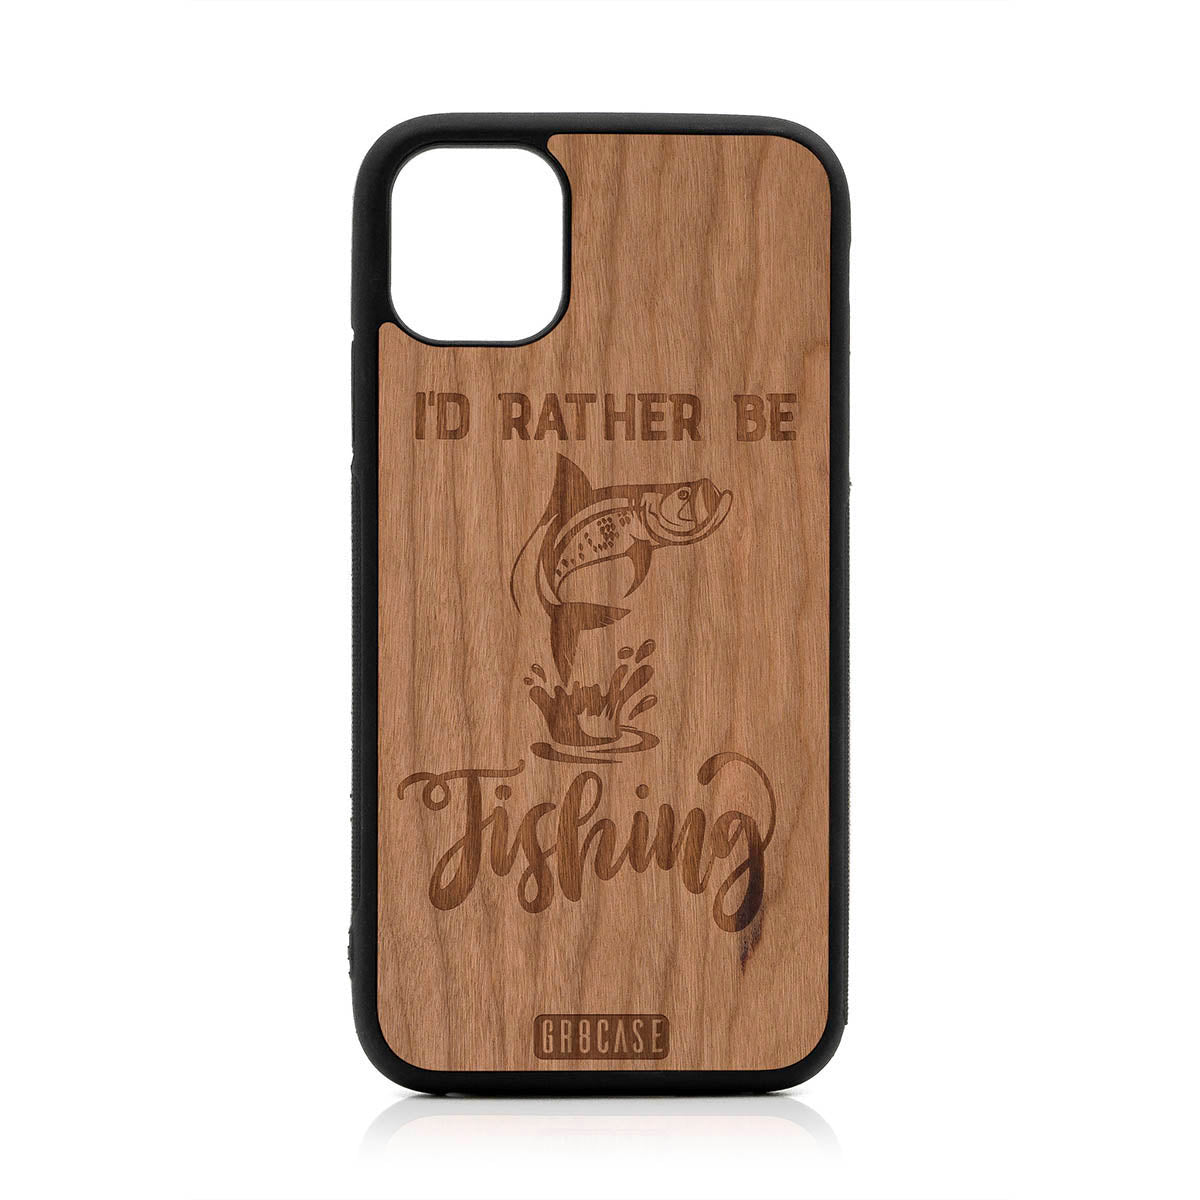 I'D Rather Be Fishing Design Wood Case For iPhone 11